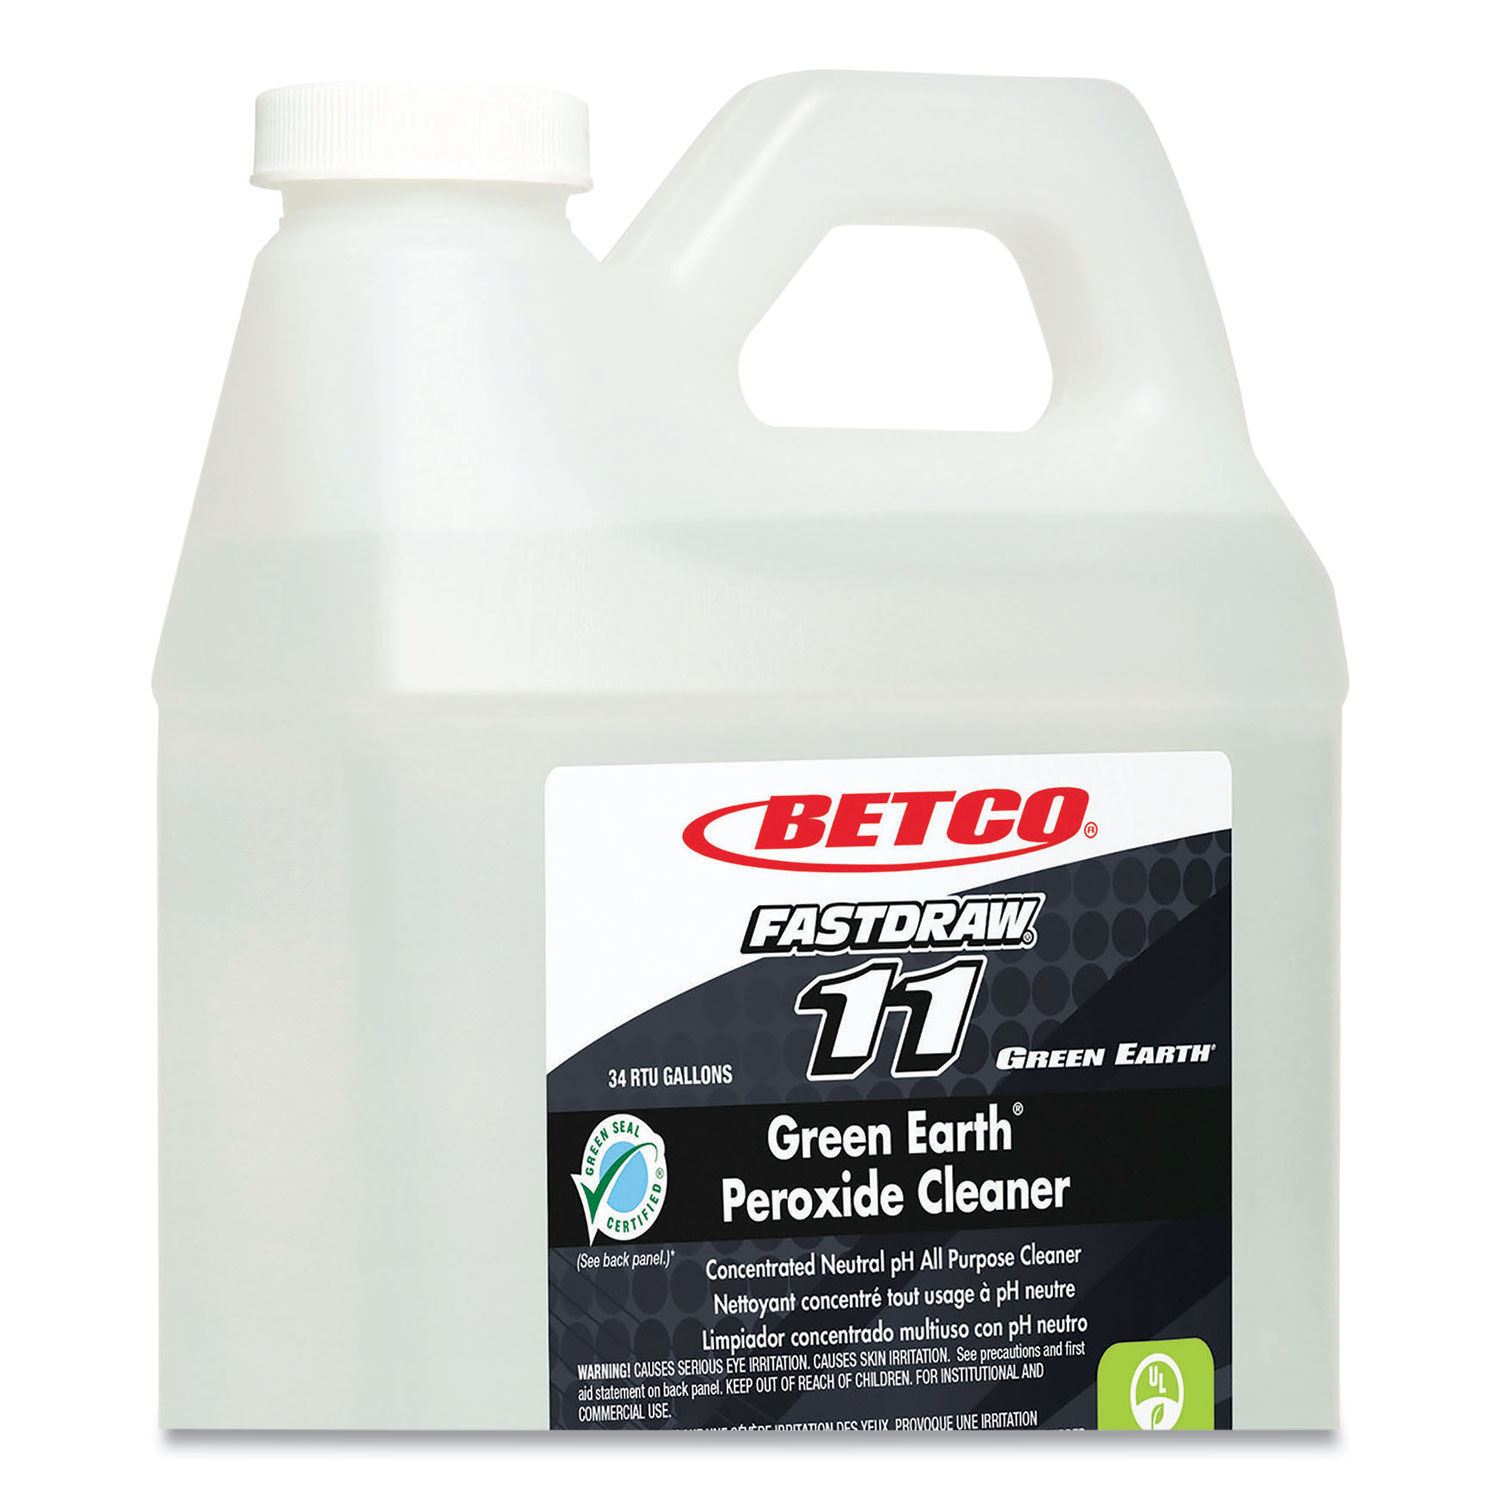 Green Earth Peroxide Neutral pH All Purpose Cleaner Fresh Mint Scent, 67.6 oz Bottle, 2/Carton